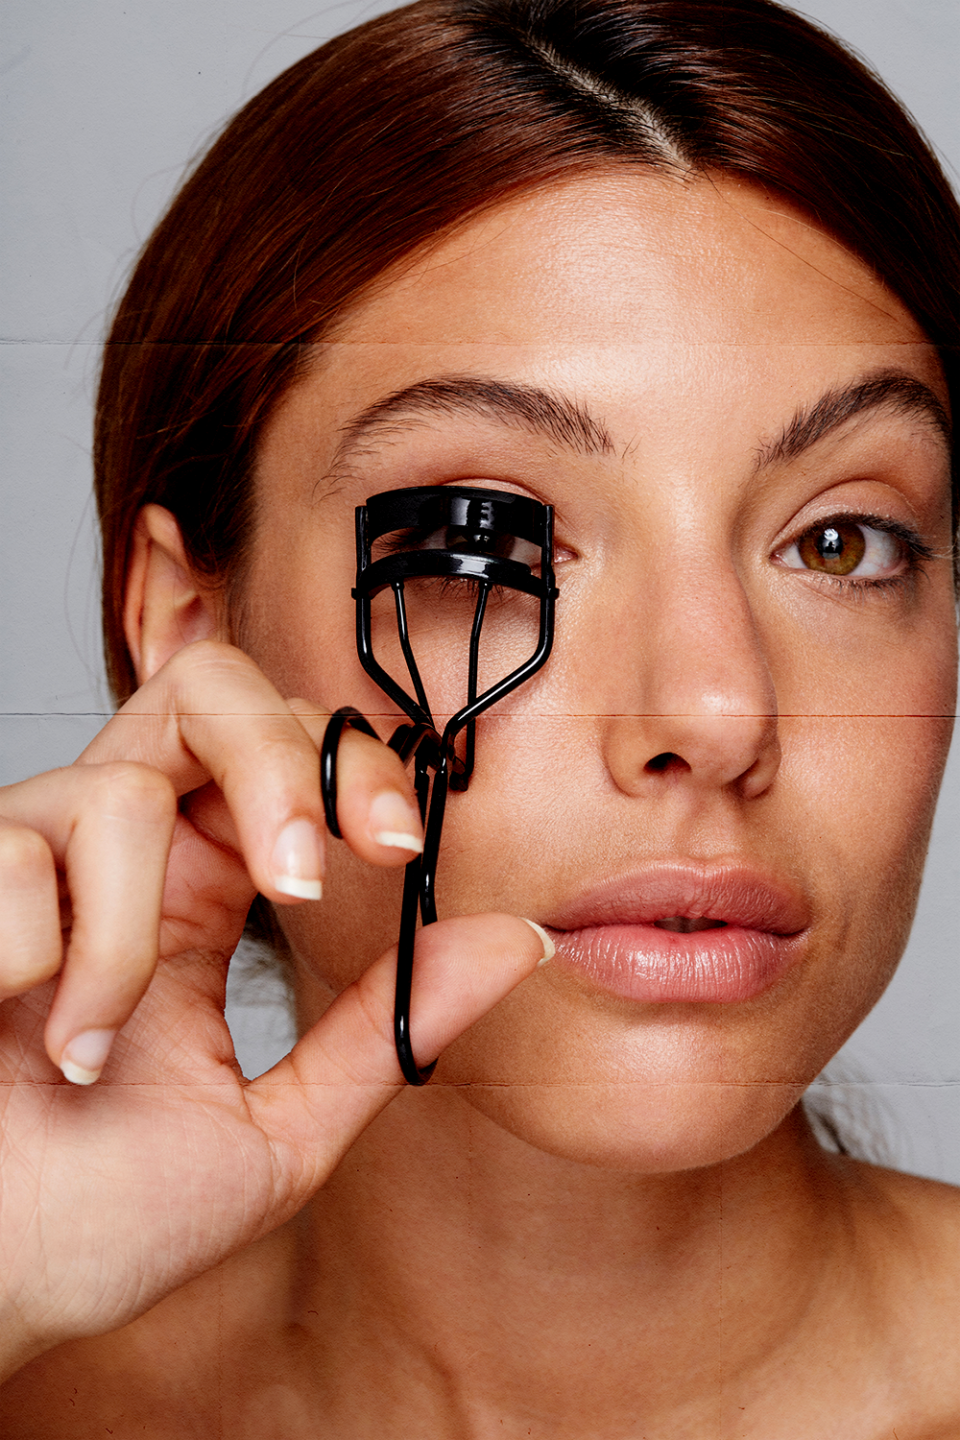 Presenting: The Best Eyelash Curlers for Majorly Lifted Lashes